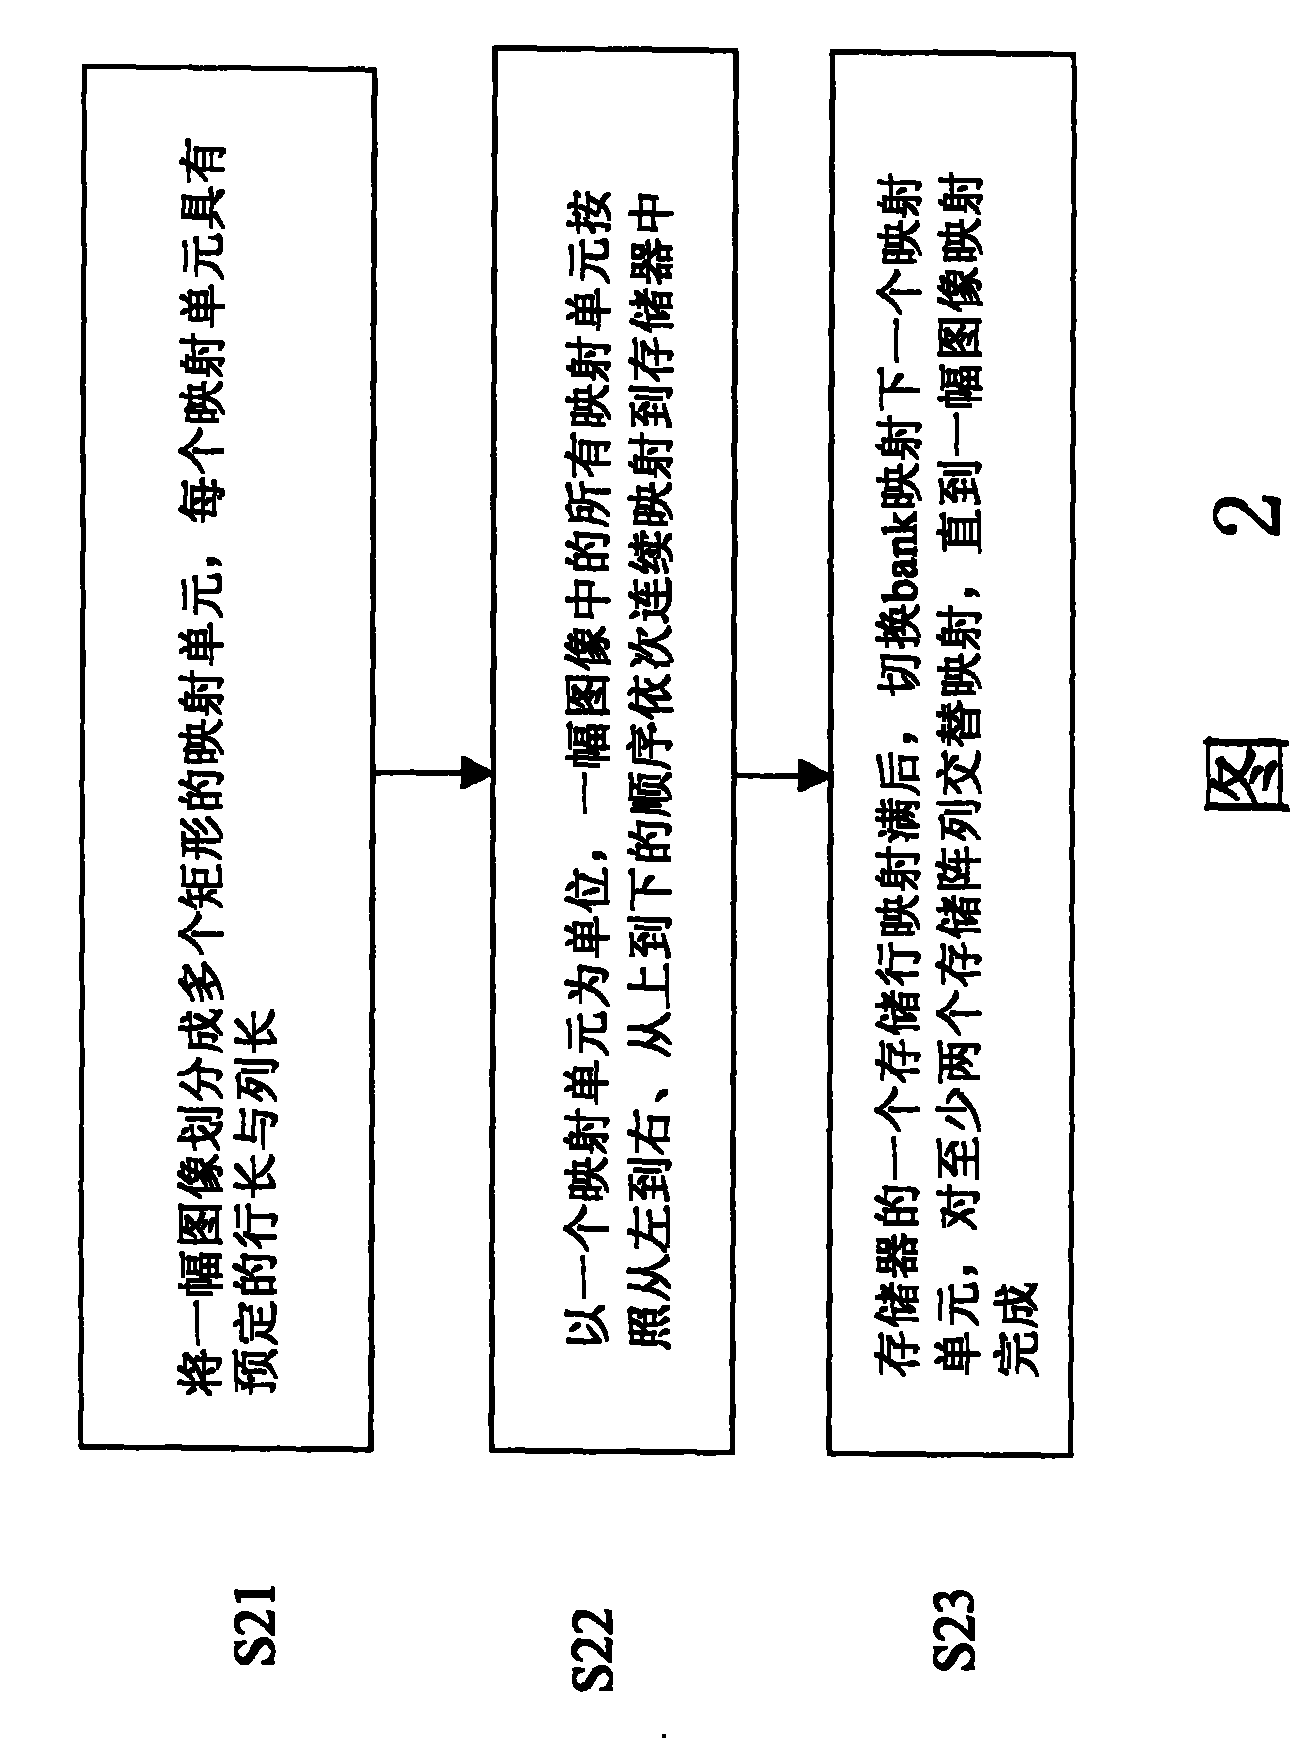 Image address mapping method in memory